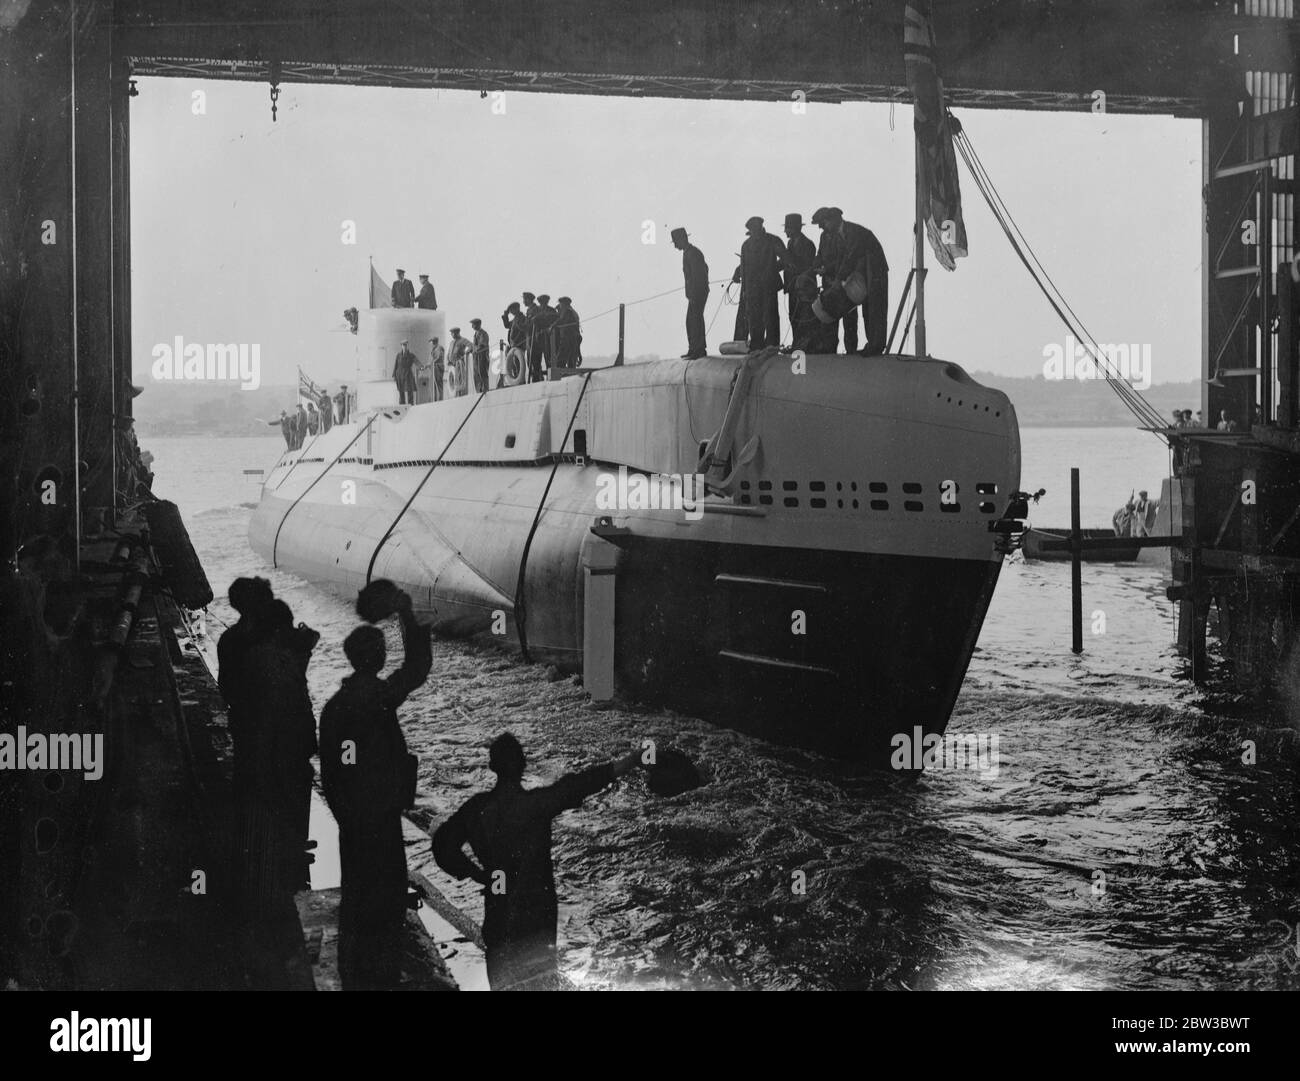 HMS Snapper , the new Royal Navy S-class submarine , was launched at Chatham Dockyard , Kent . The naming ceremony was performed by Lady Tweedie , the wife of Vice-Admiral Sir Hugh J Tweedie who is the Commander-in-Chief of the Nore . Photo shows the new submarine taking the water at her launch October 25th 1934 . Stock Photo